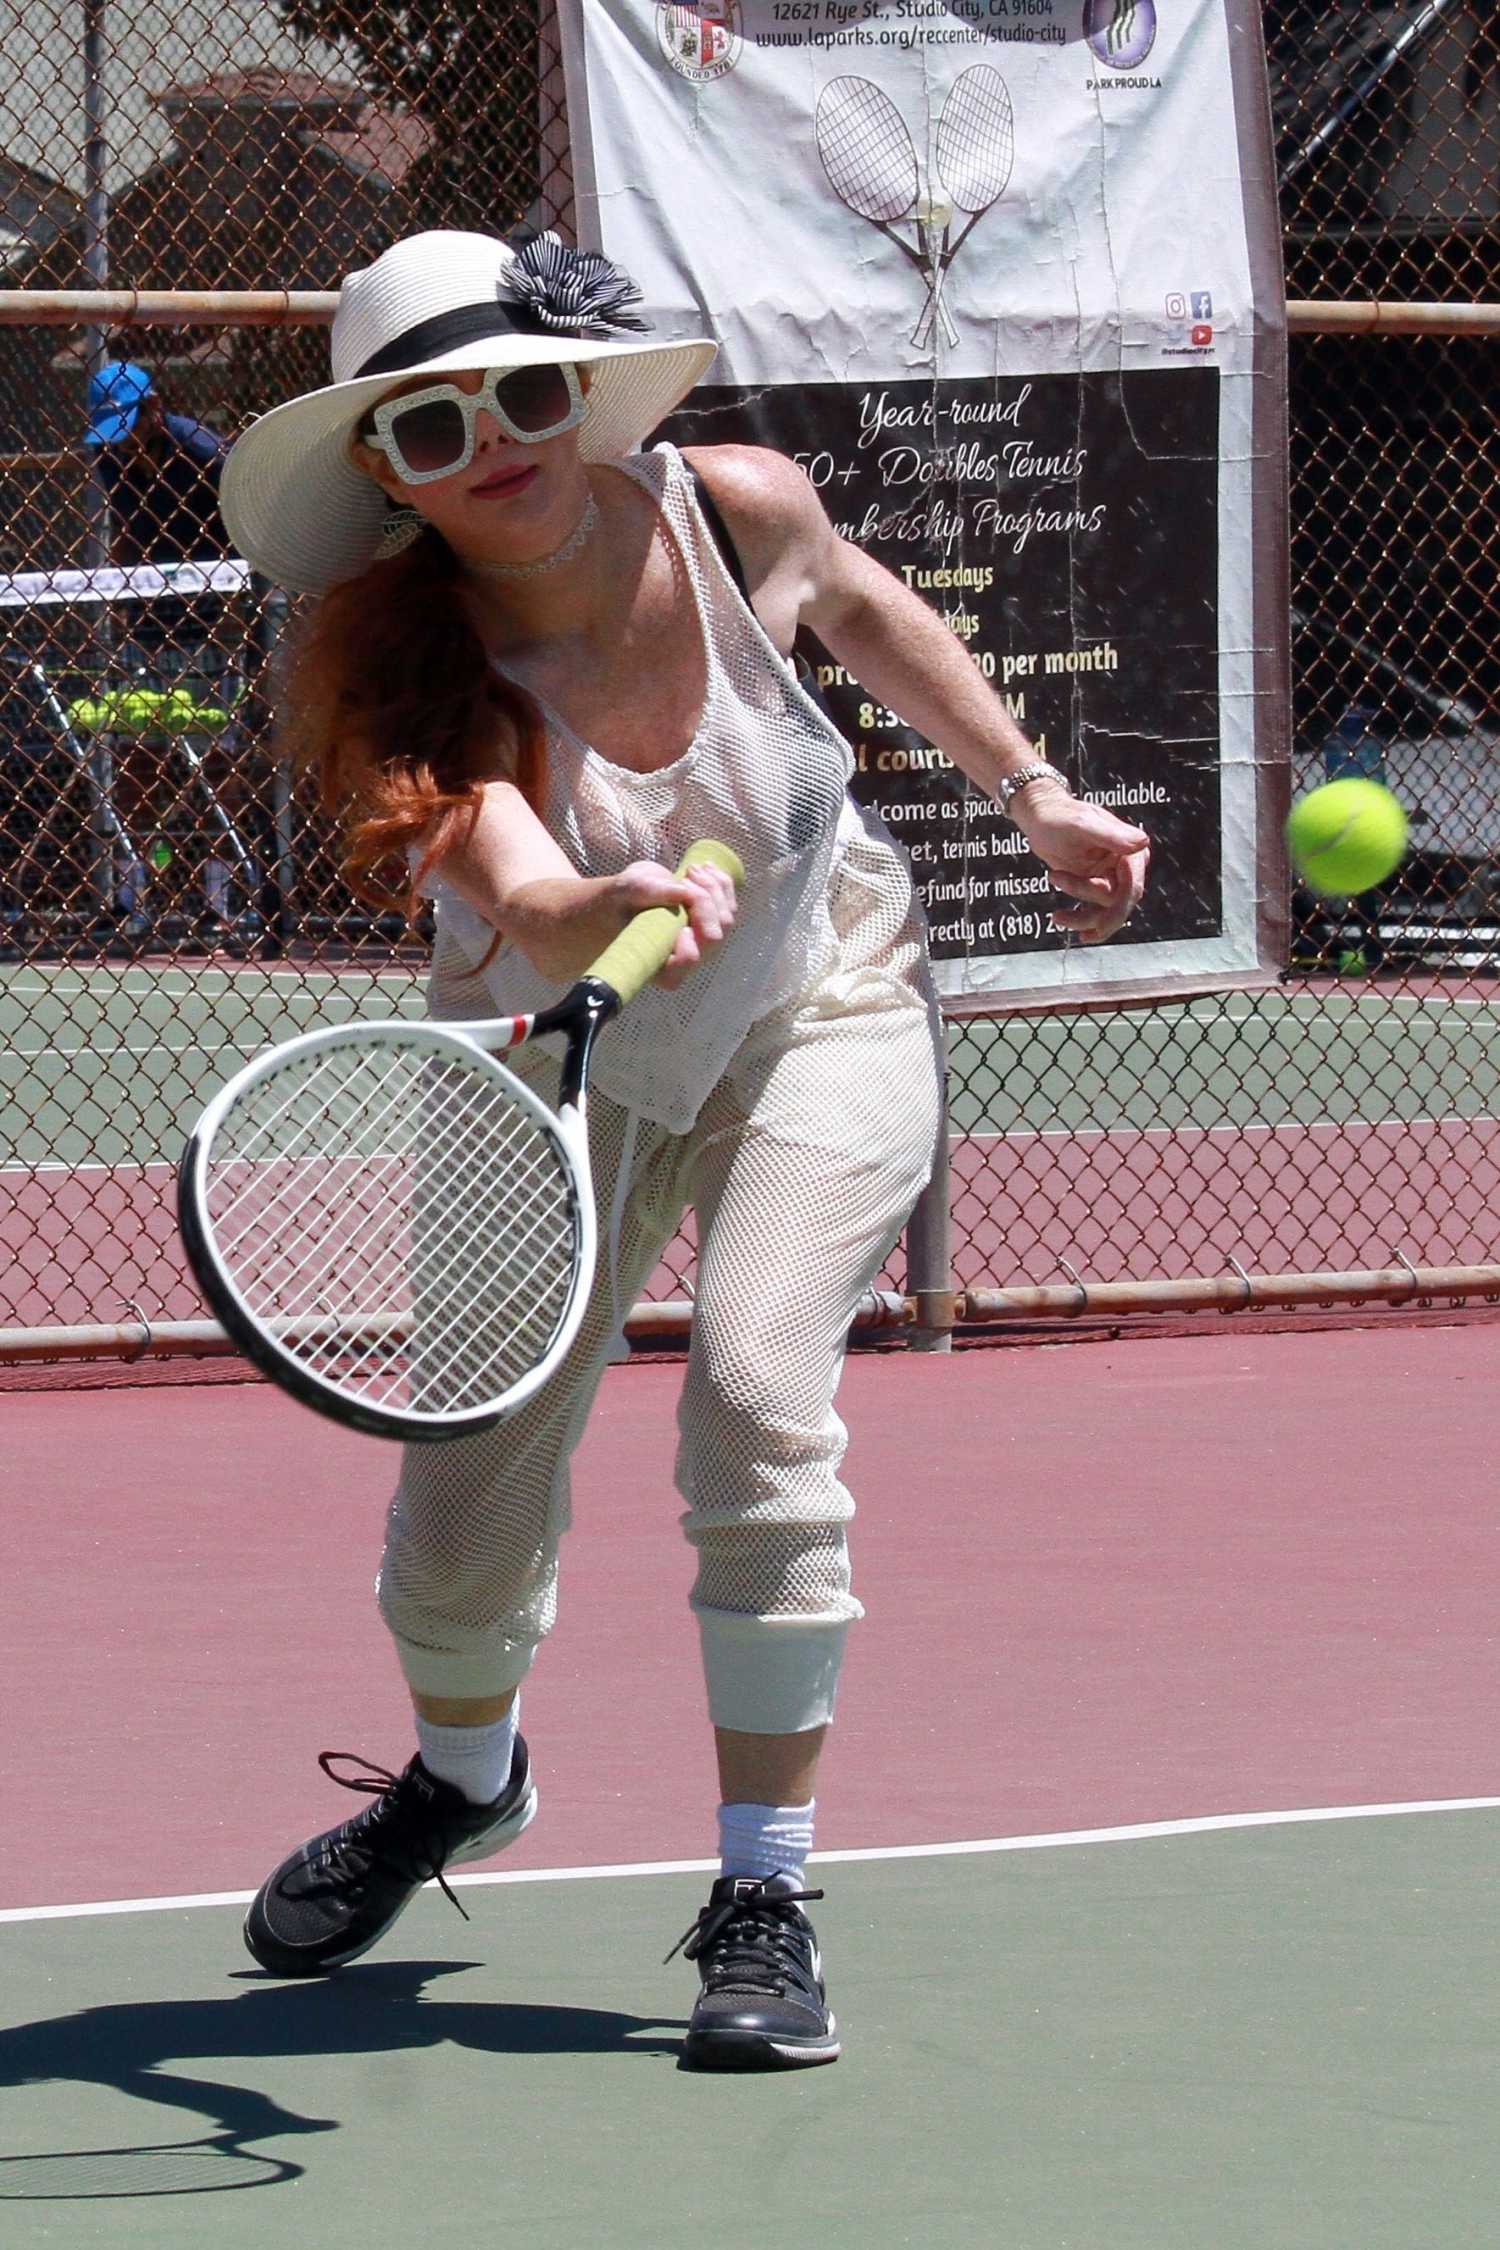 Phoebe Price in a See-Through Outfit Was Seen at the Tennis Court in